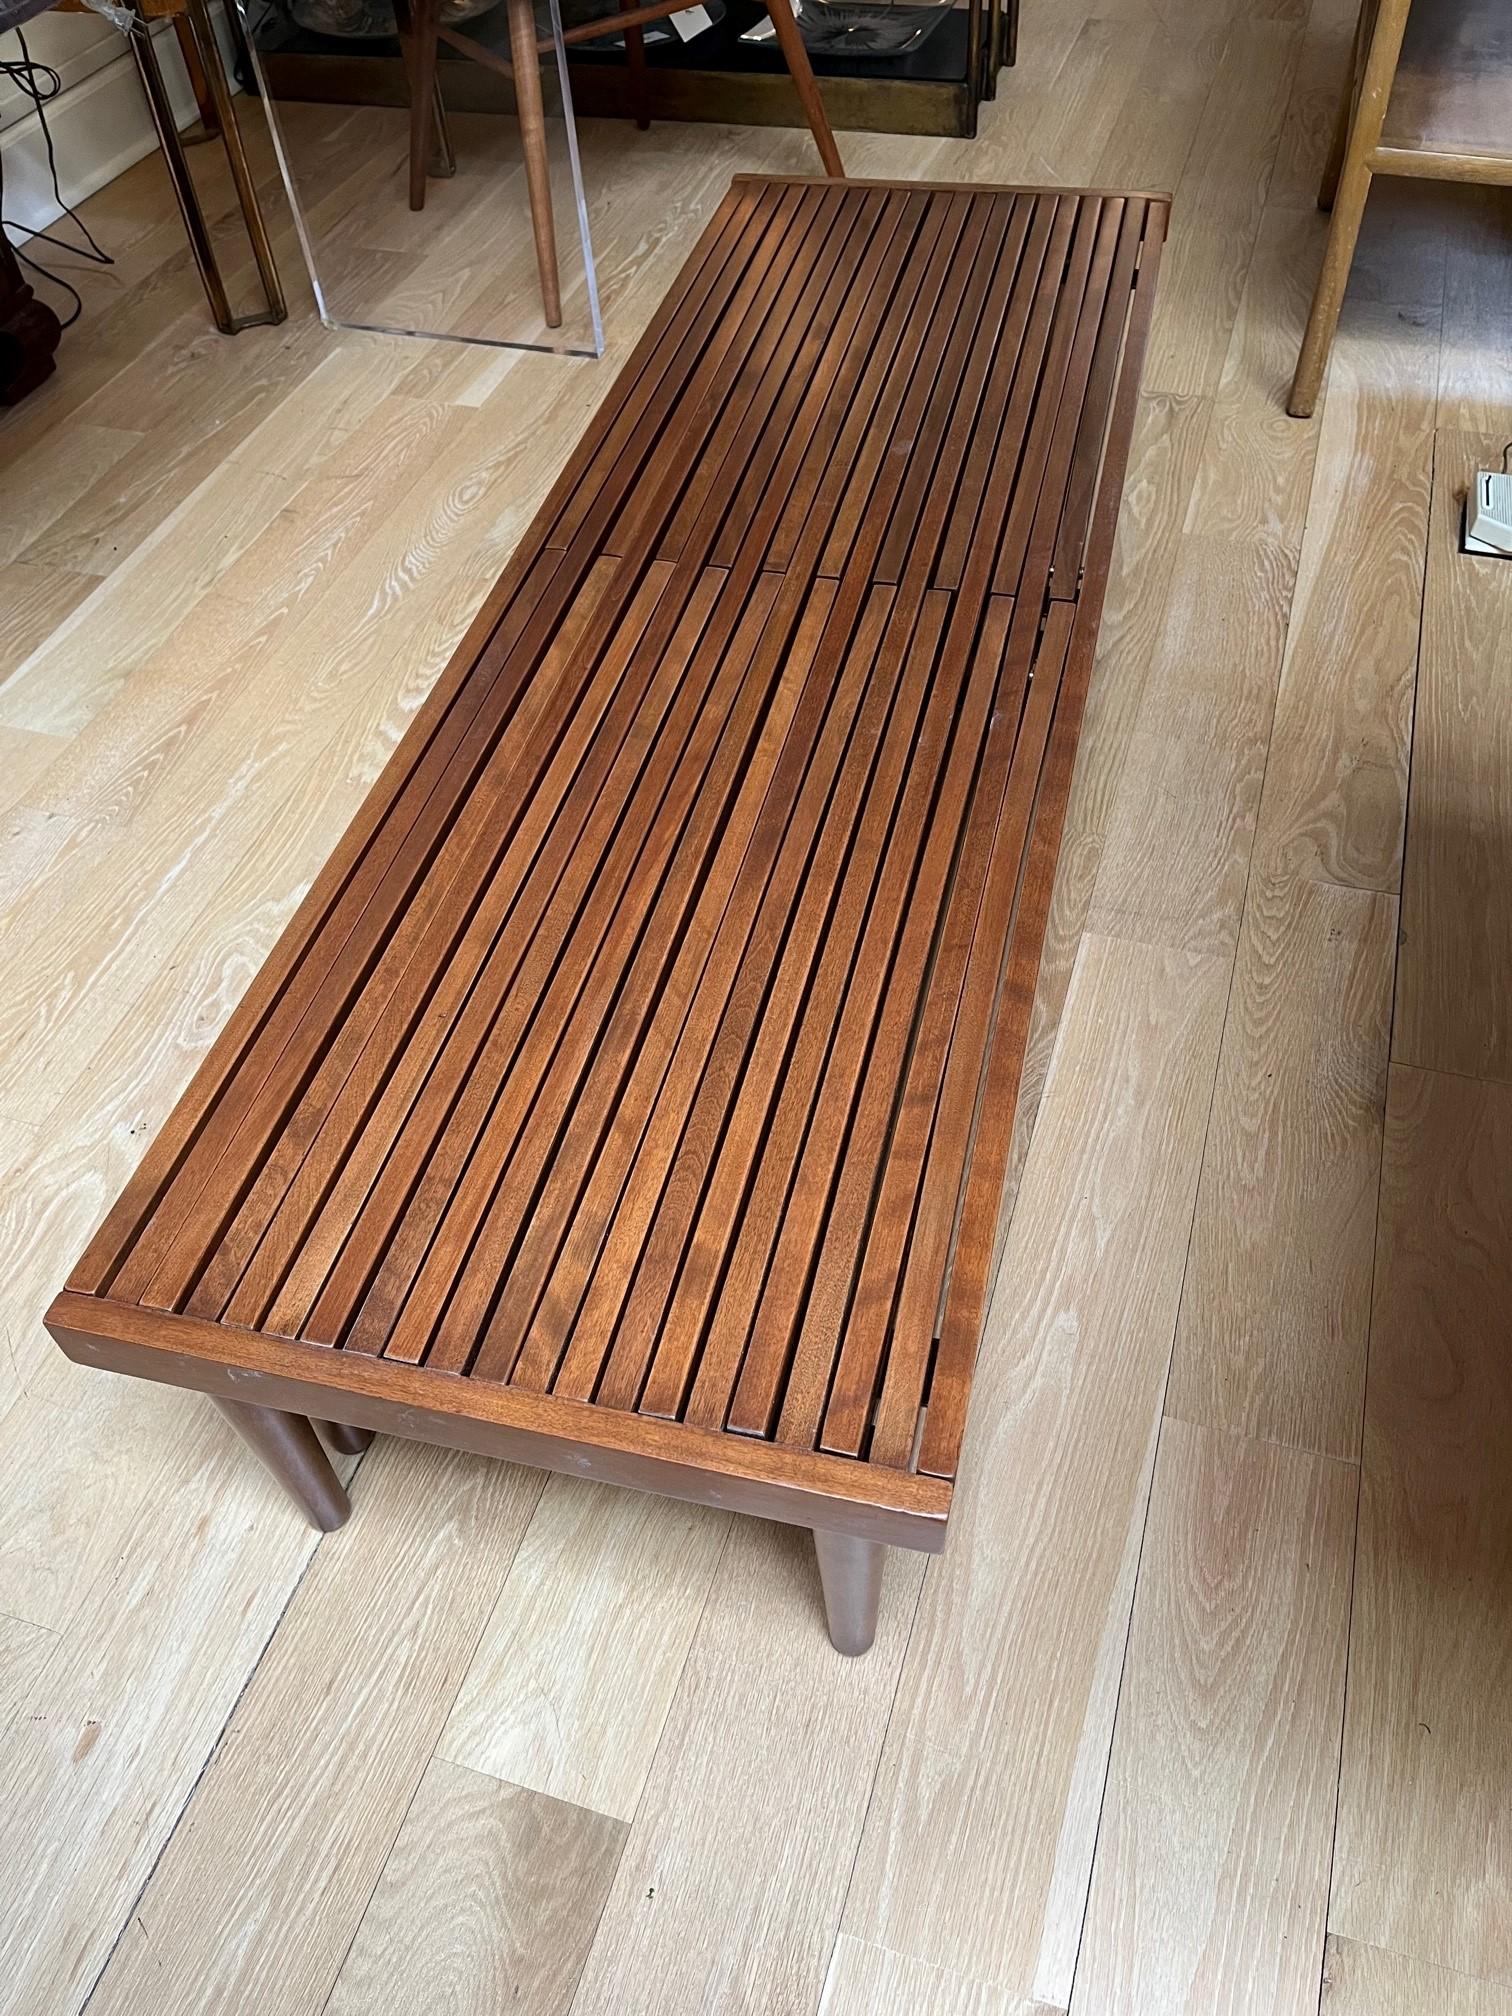 Mid-Century Modern expandable slatted wood bench by John Keal
Newly refinished.